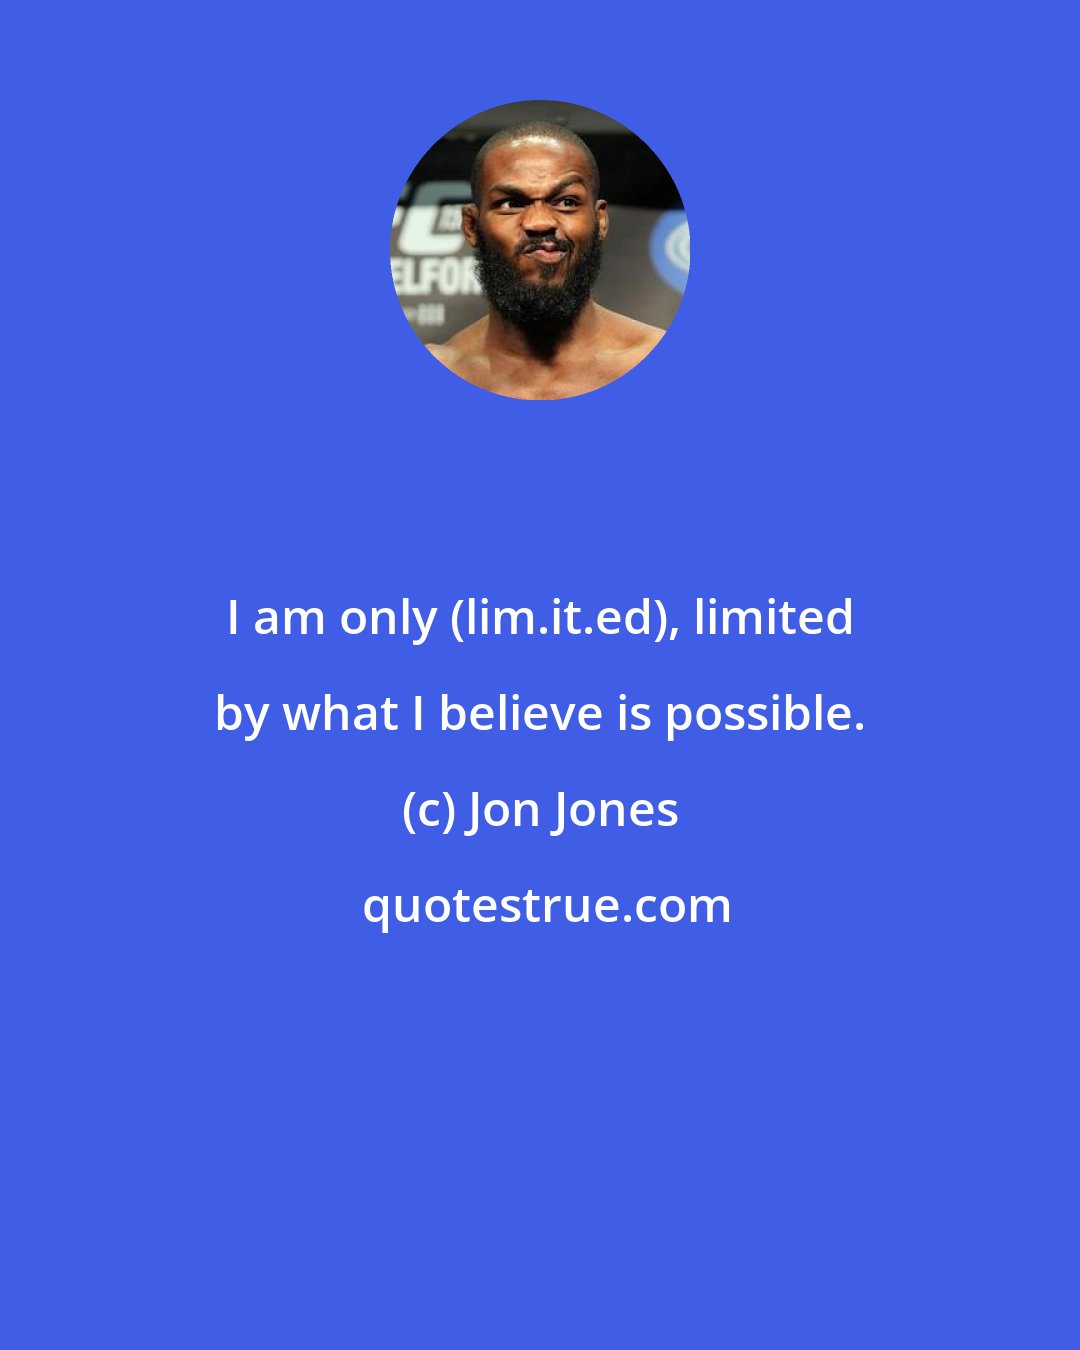 Jon Jones: I am only (lim.it.ed), limited by what I believe is possible.